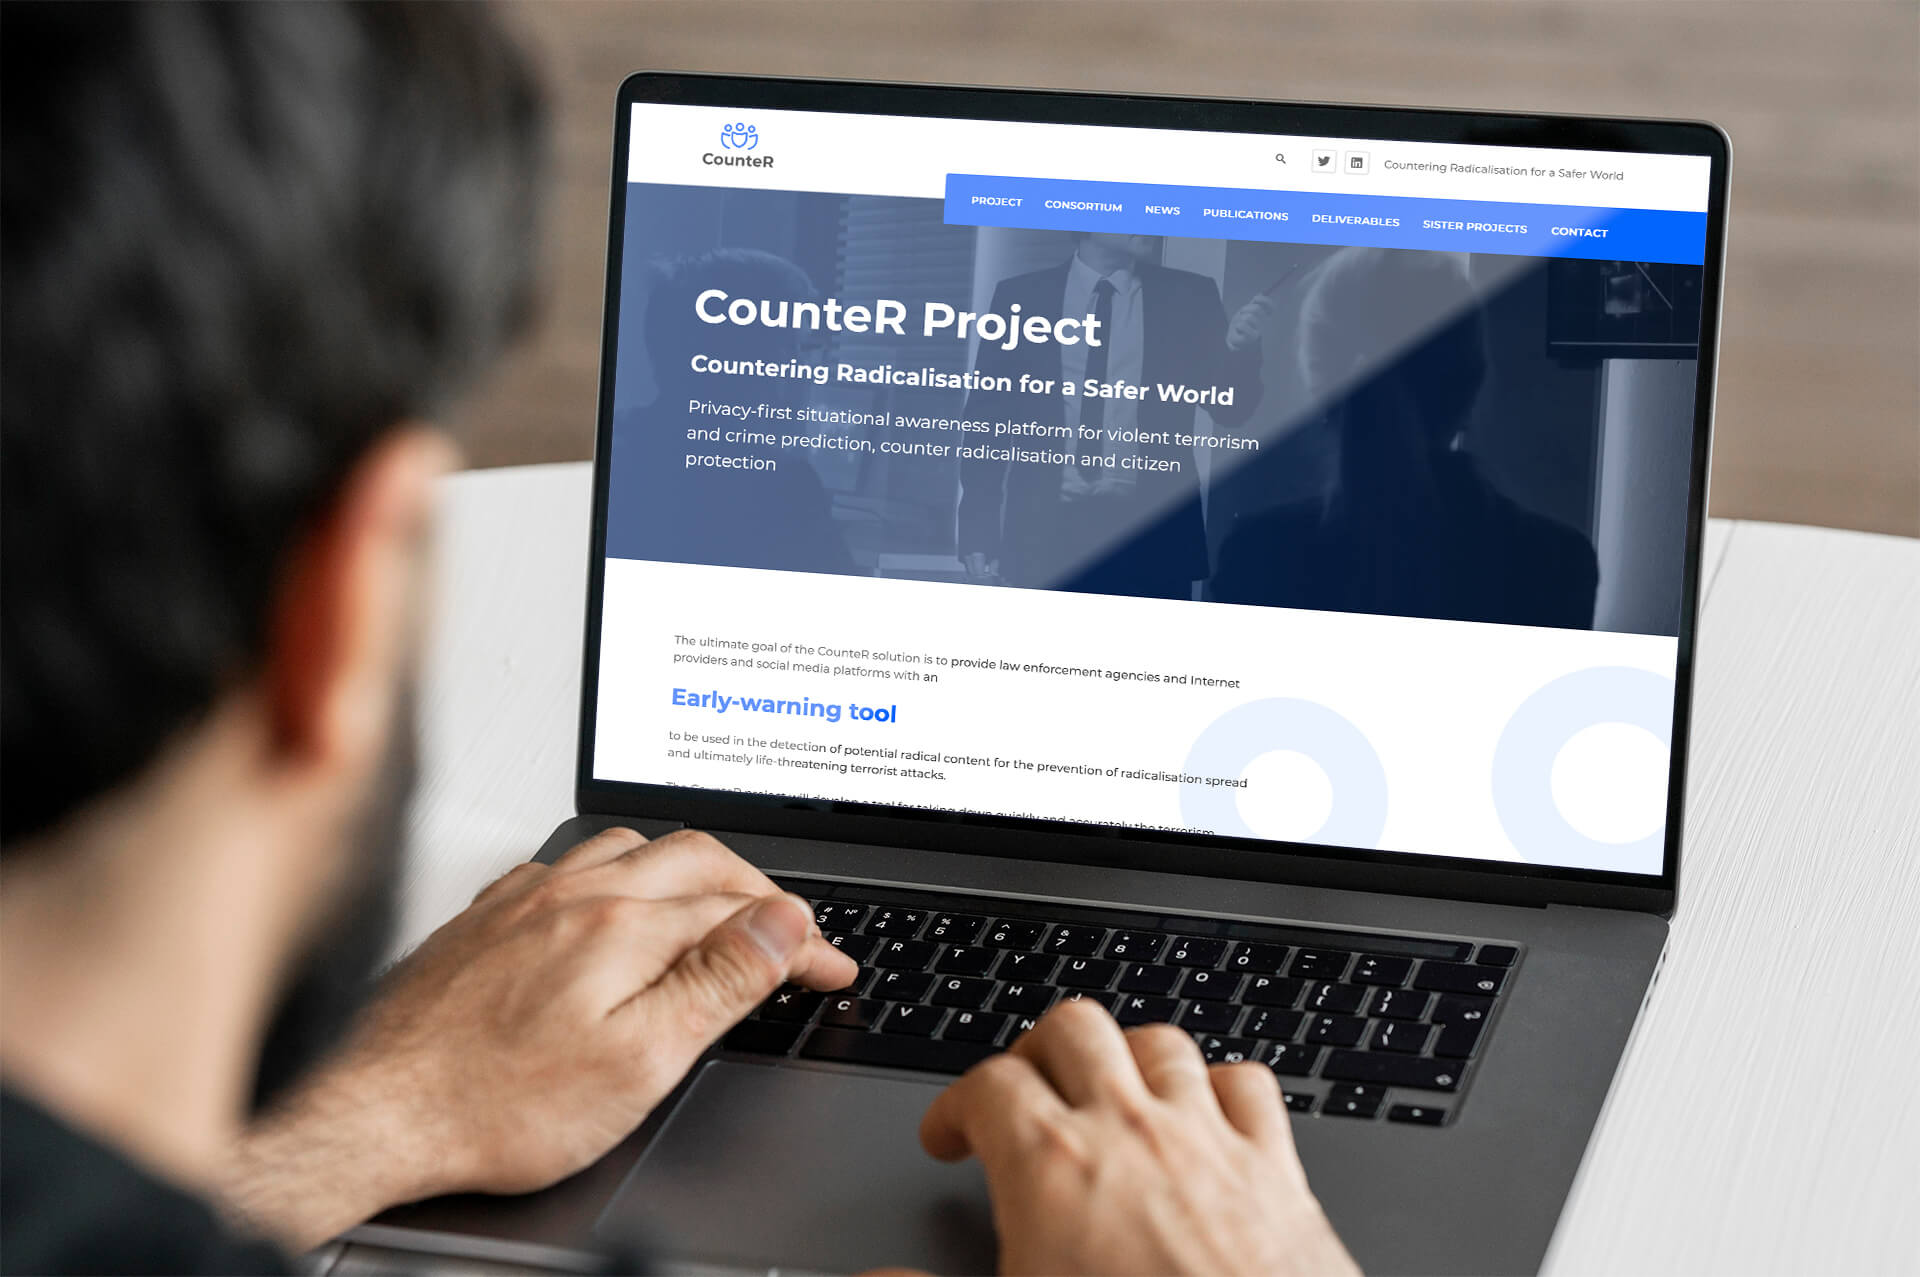 Man typing on a laptop with the Counter Project website open on the screen